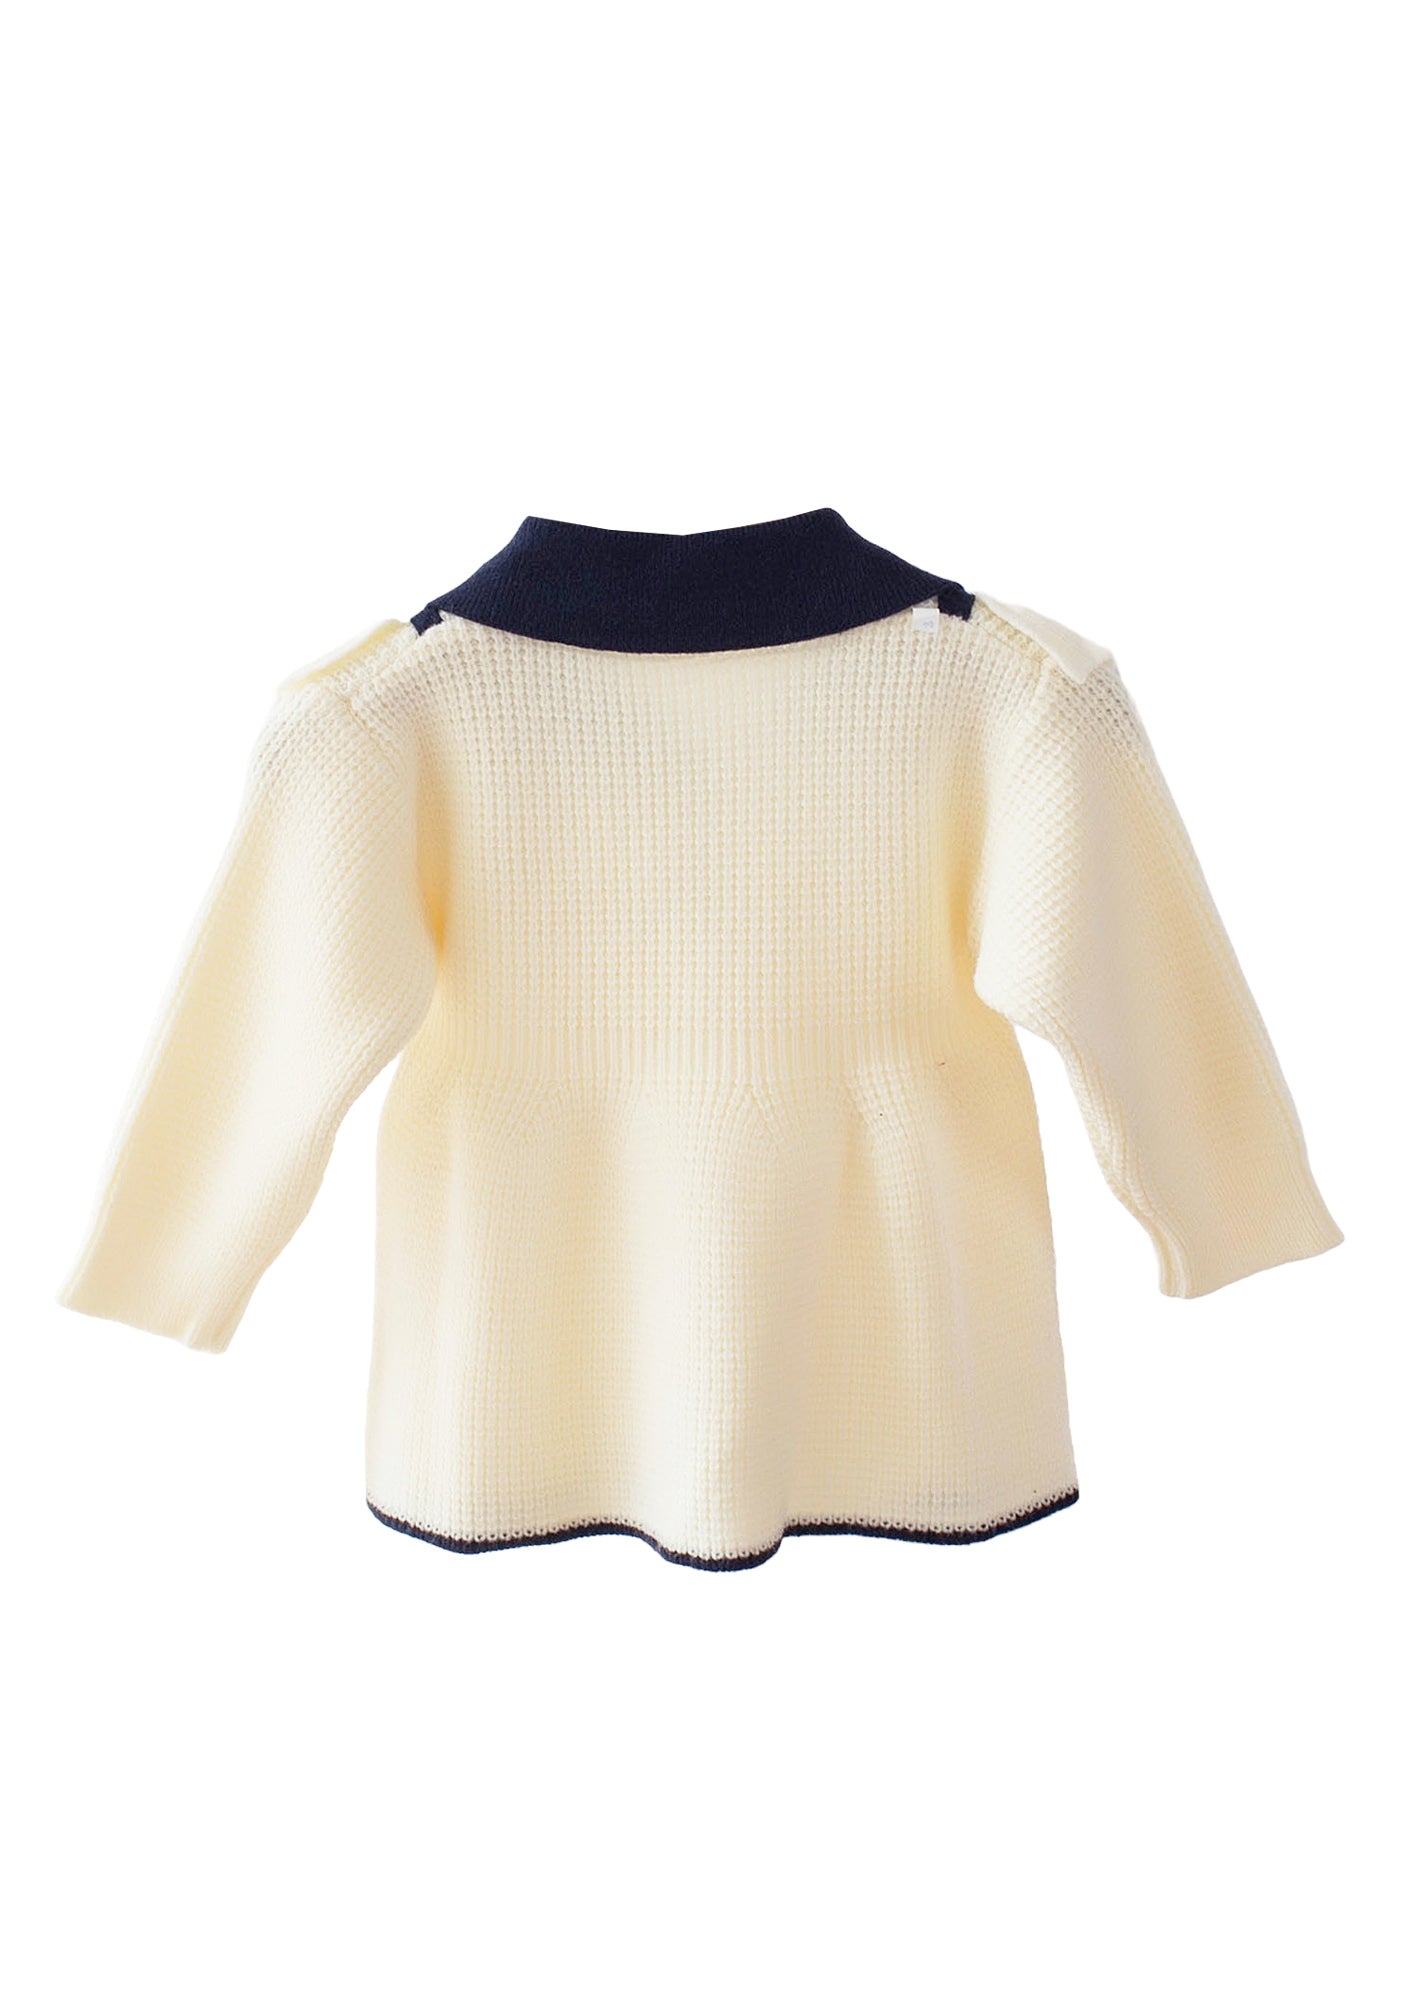 GIRLS - Lovely Fall Two Button Sweater - Hannah Rose Vintage Boutique